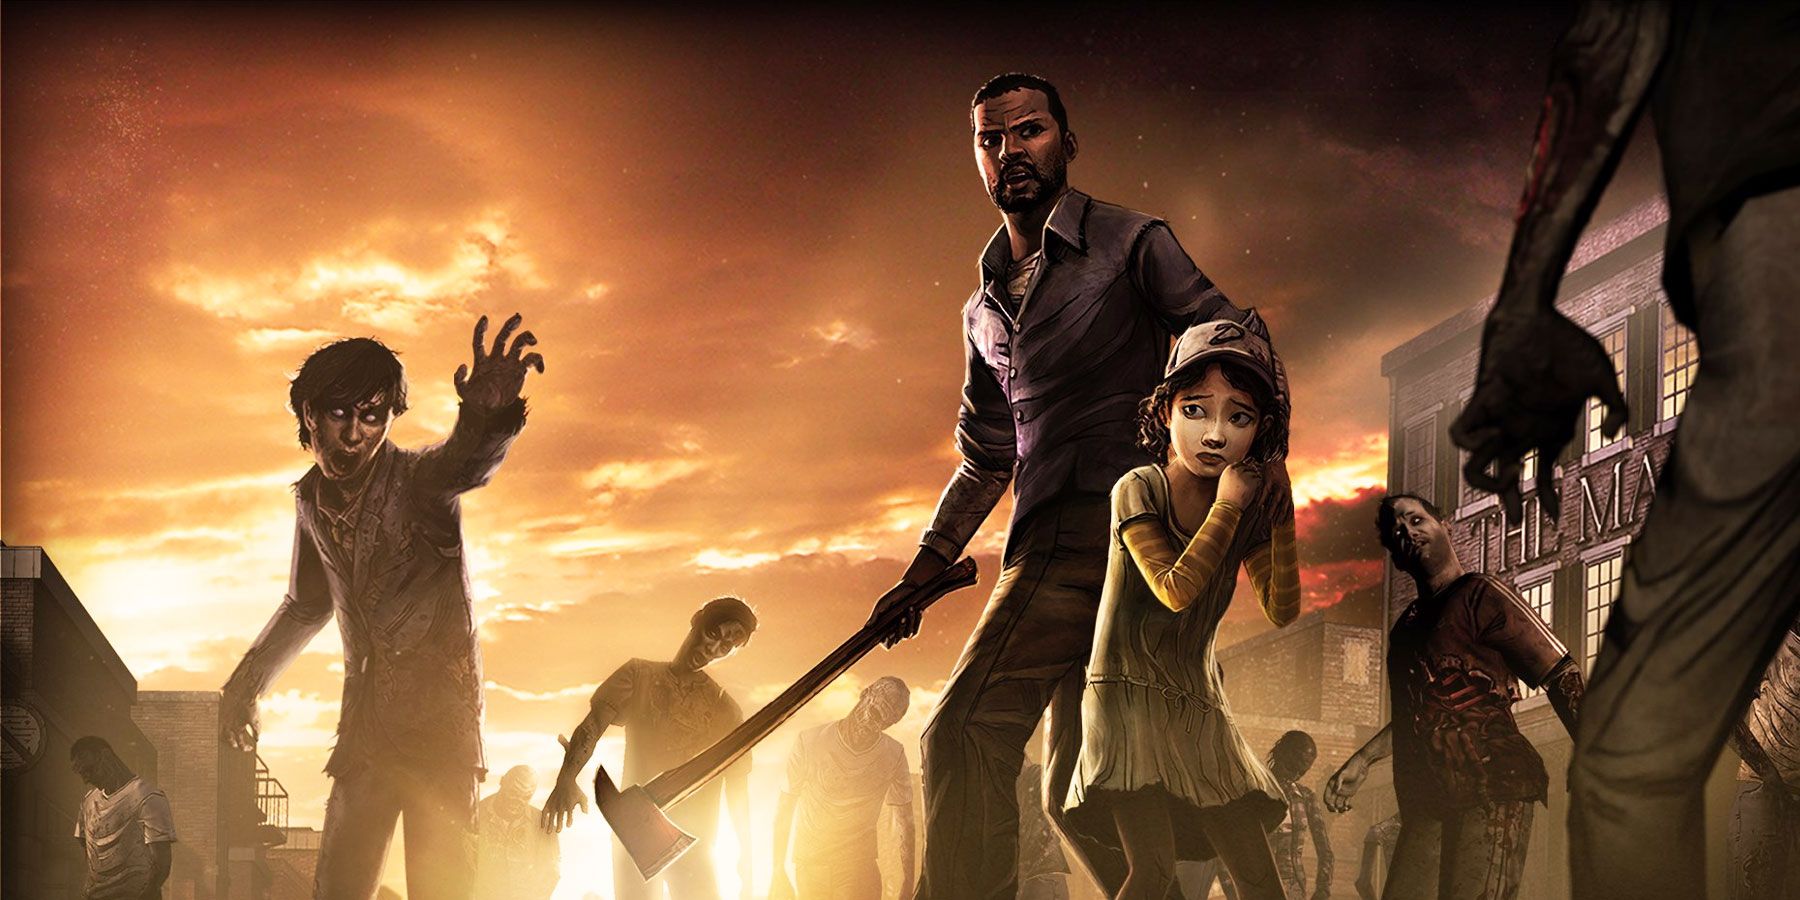 Man defending child with axe against horde of zombies in The Walking Dead Telltale Definitive Series